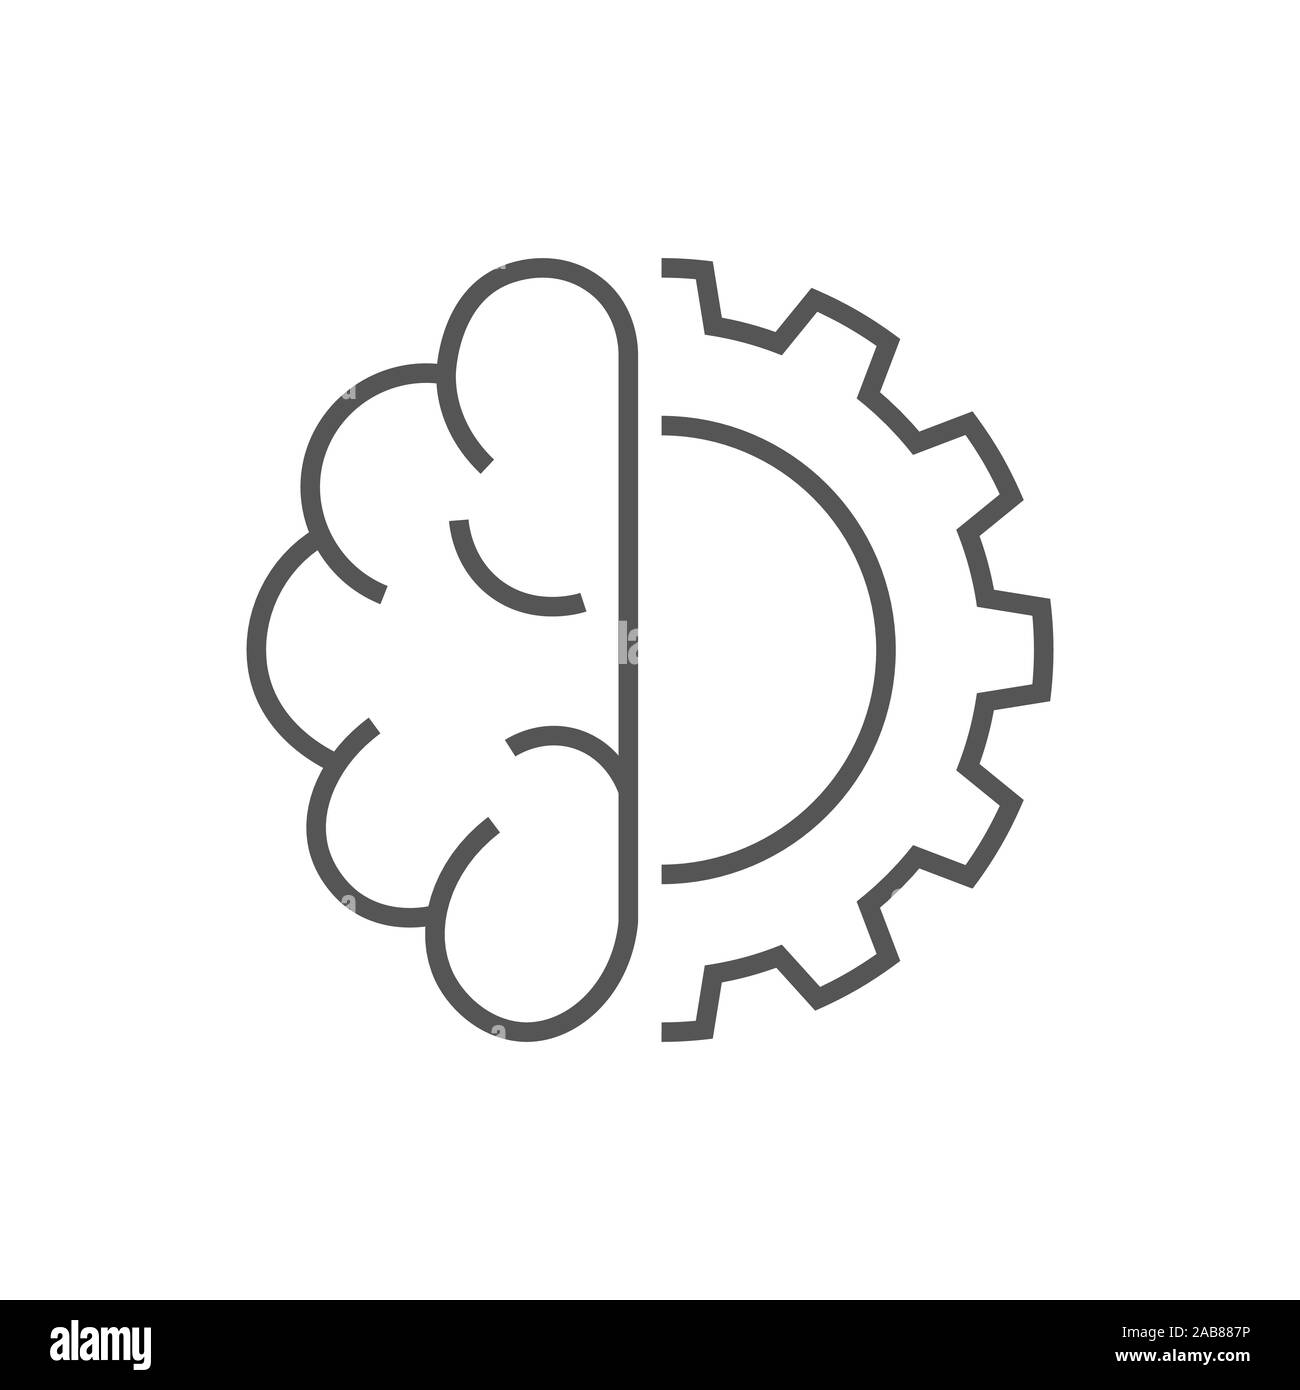 Artificial cybernetic brain. Concept of using high technology to create artificial intelligence AI . EPS 10 Stock Vector